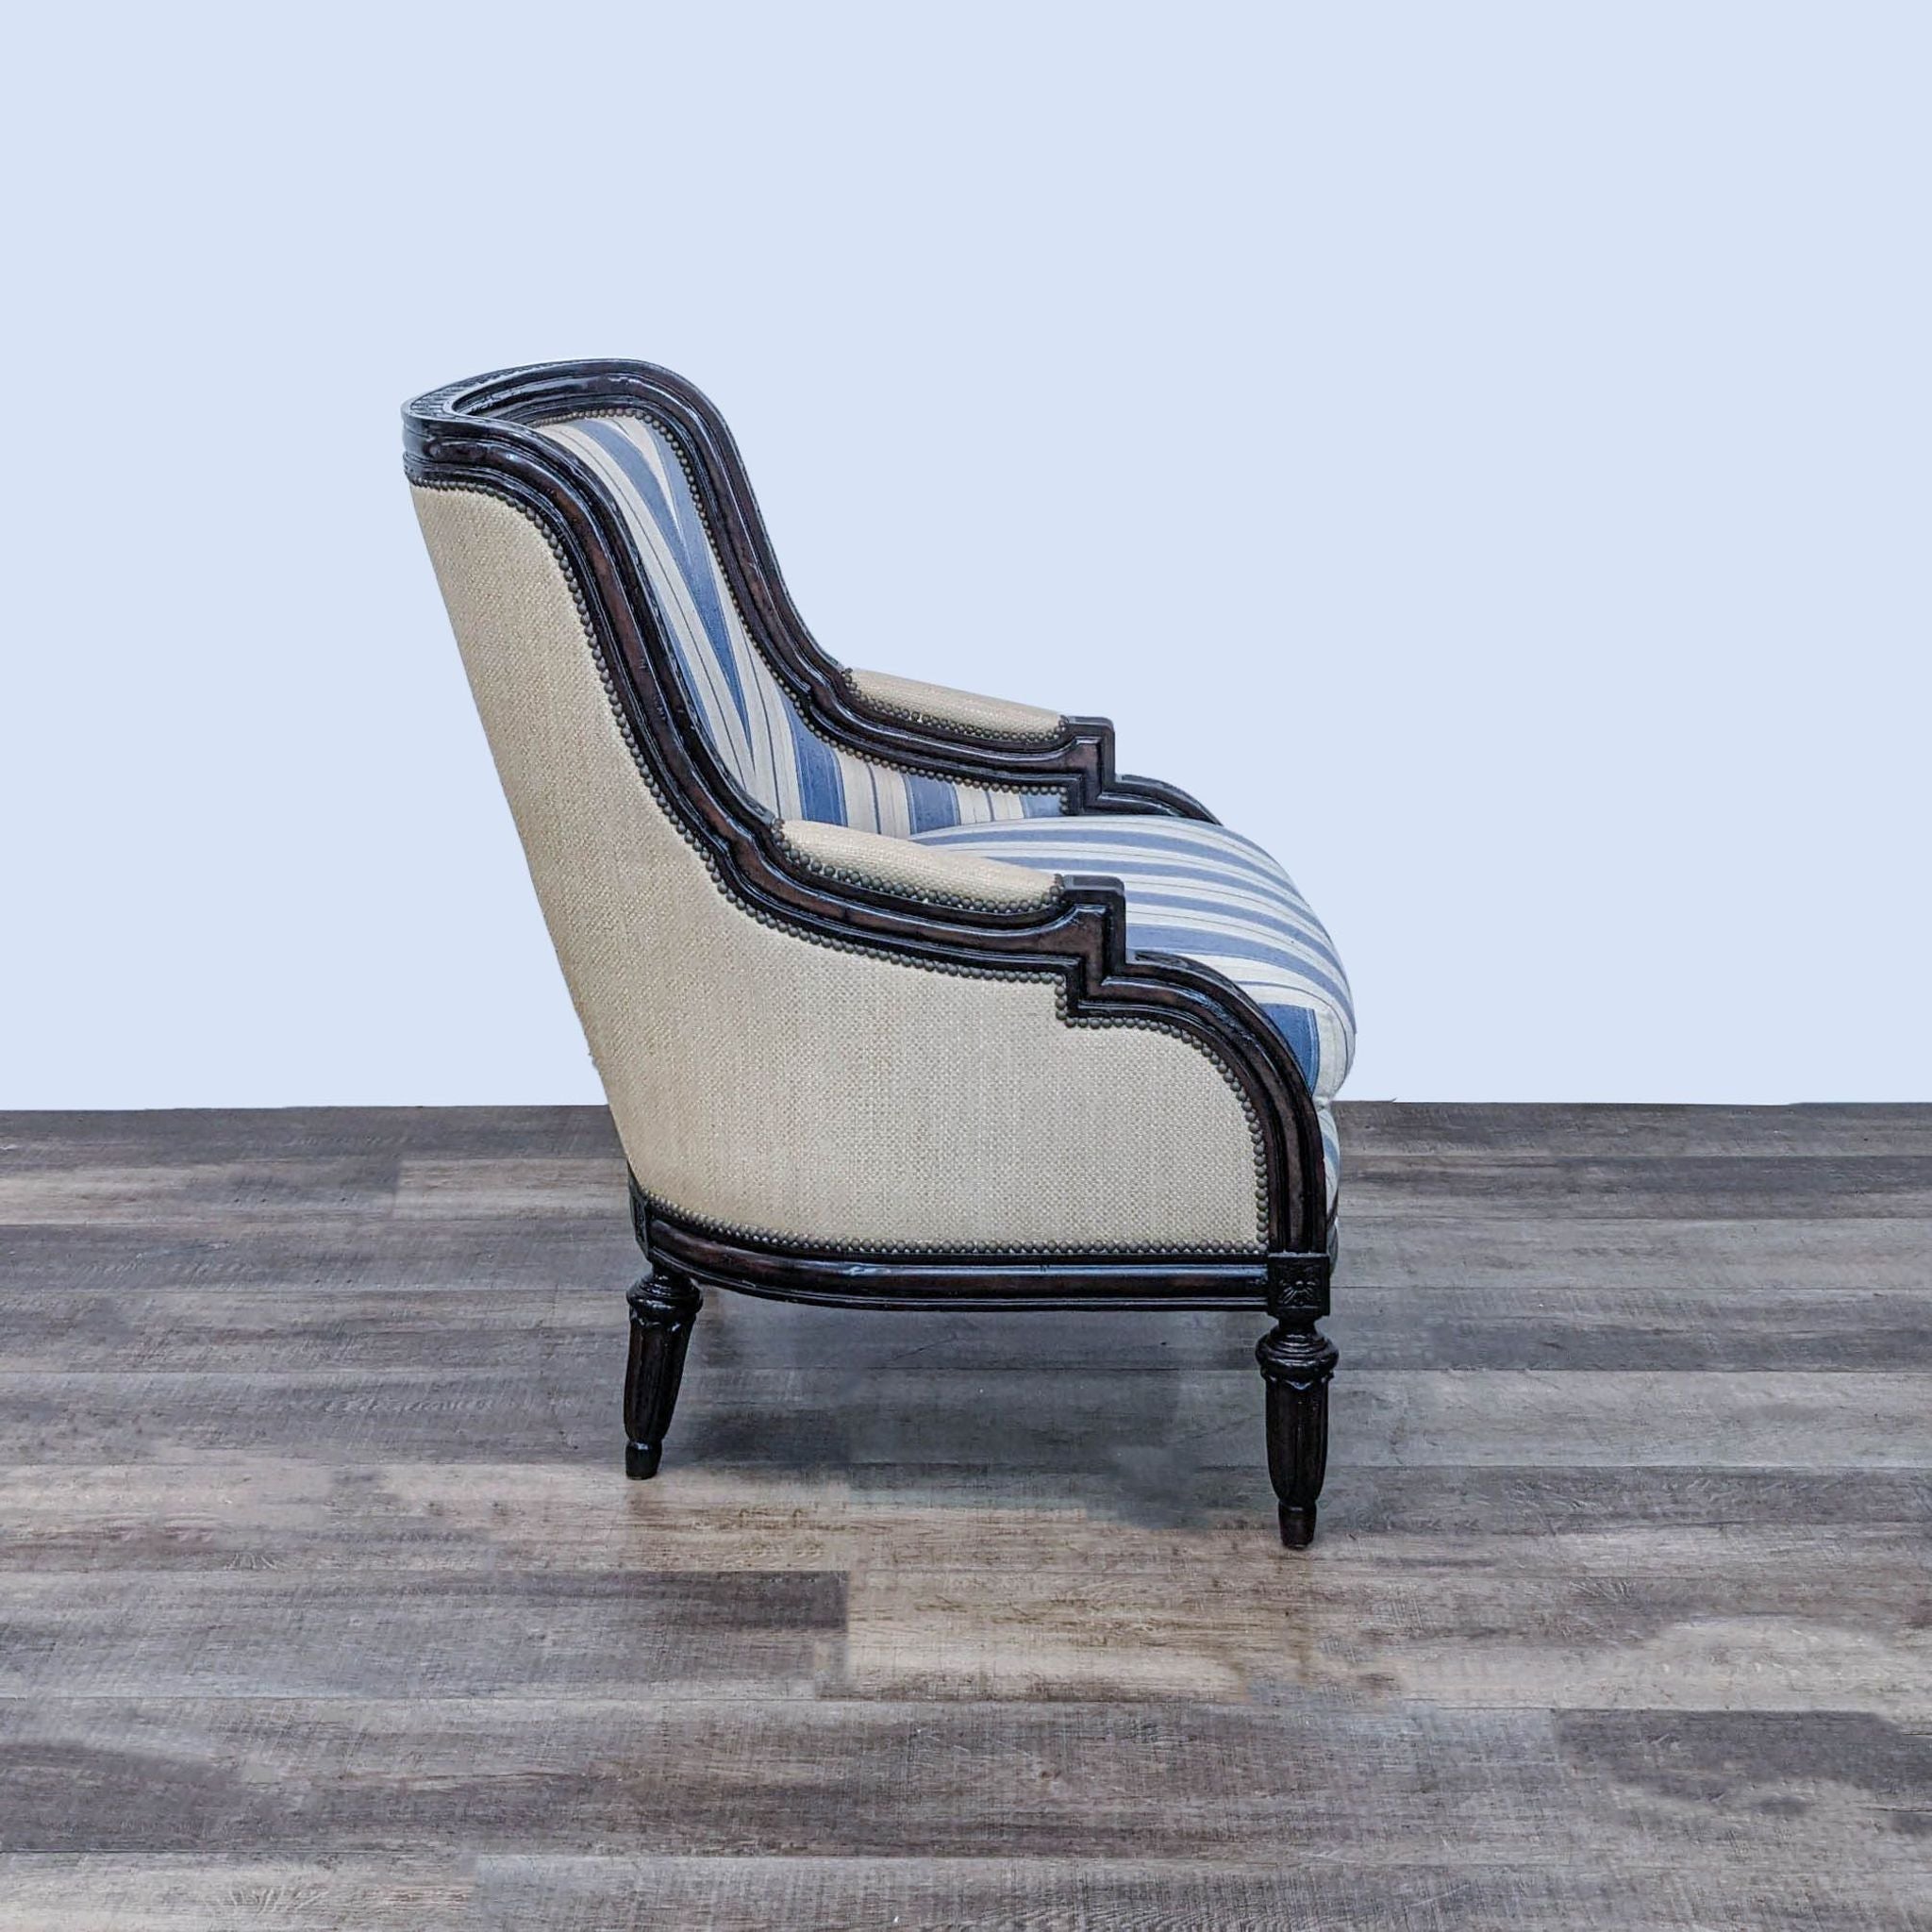 Classic Marge Carson lounge chair, profile view, featuring cool stripes, nailhead accents, and ornate wooden legs.